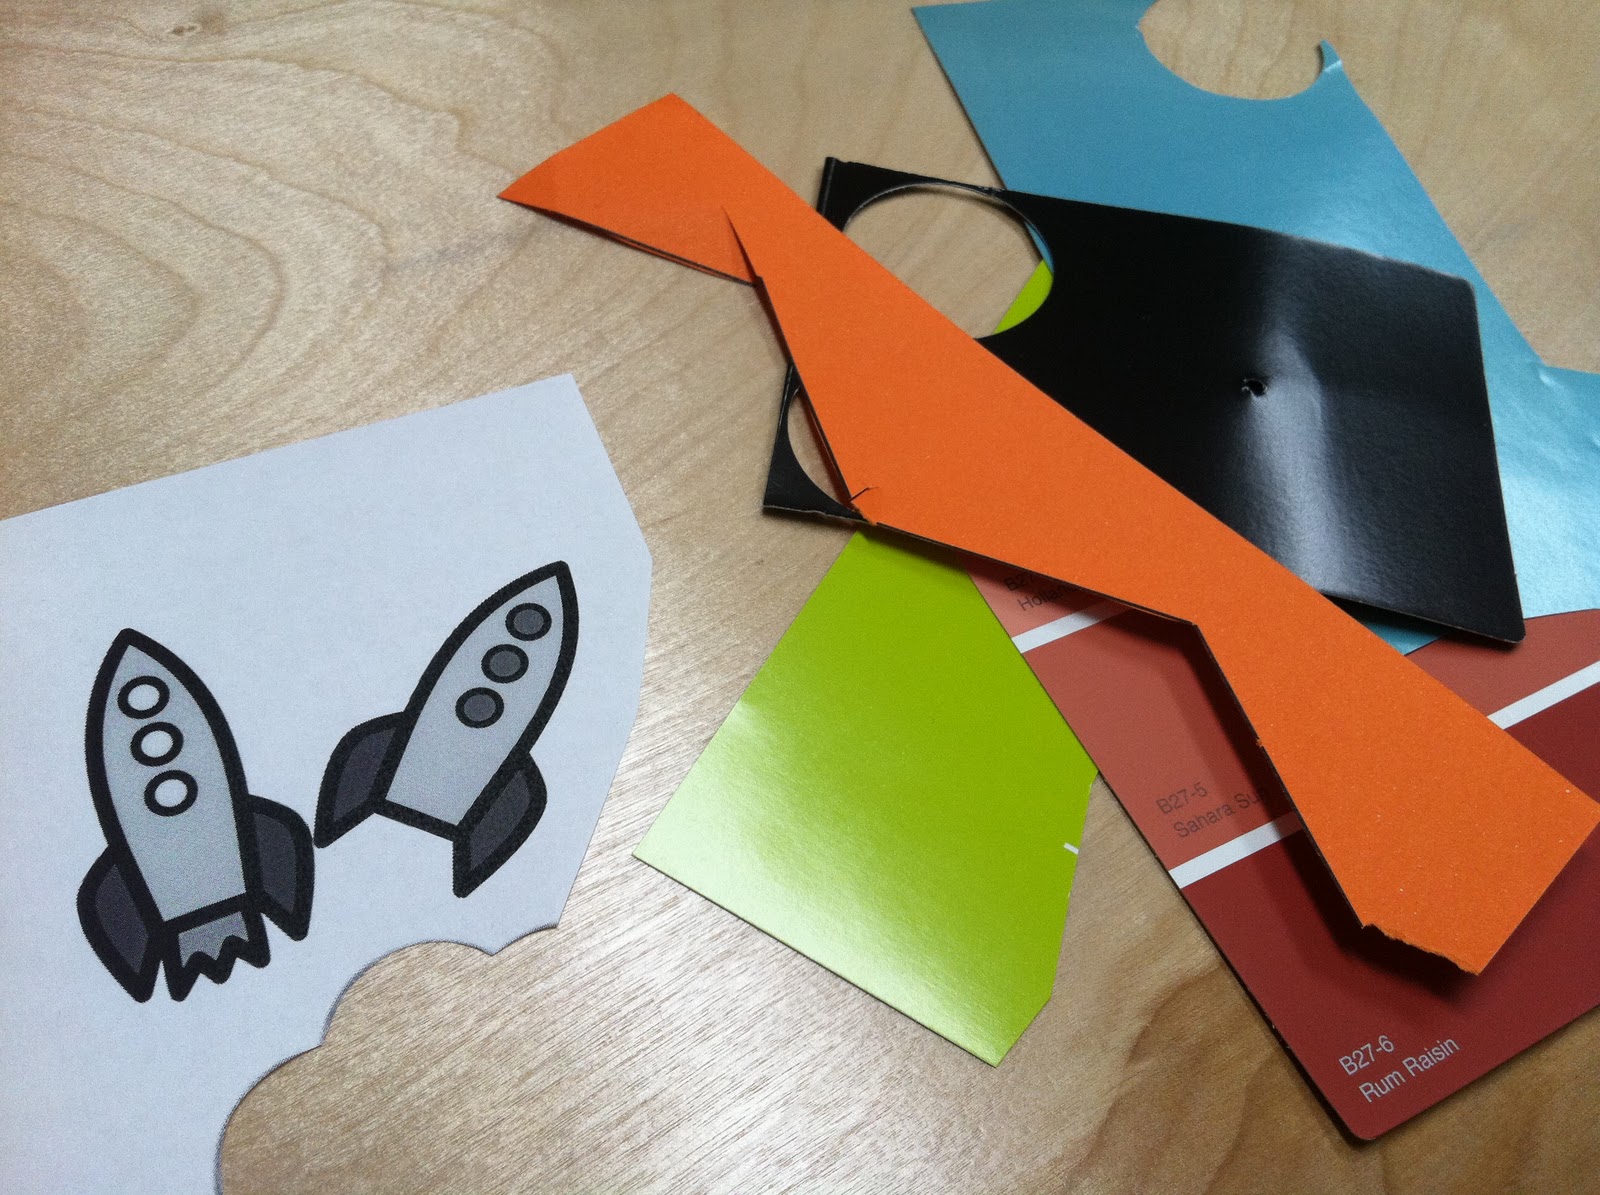 The Contemplative Creative Rocket Gift Tag